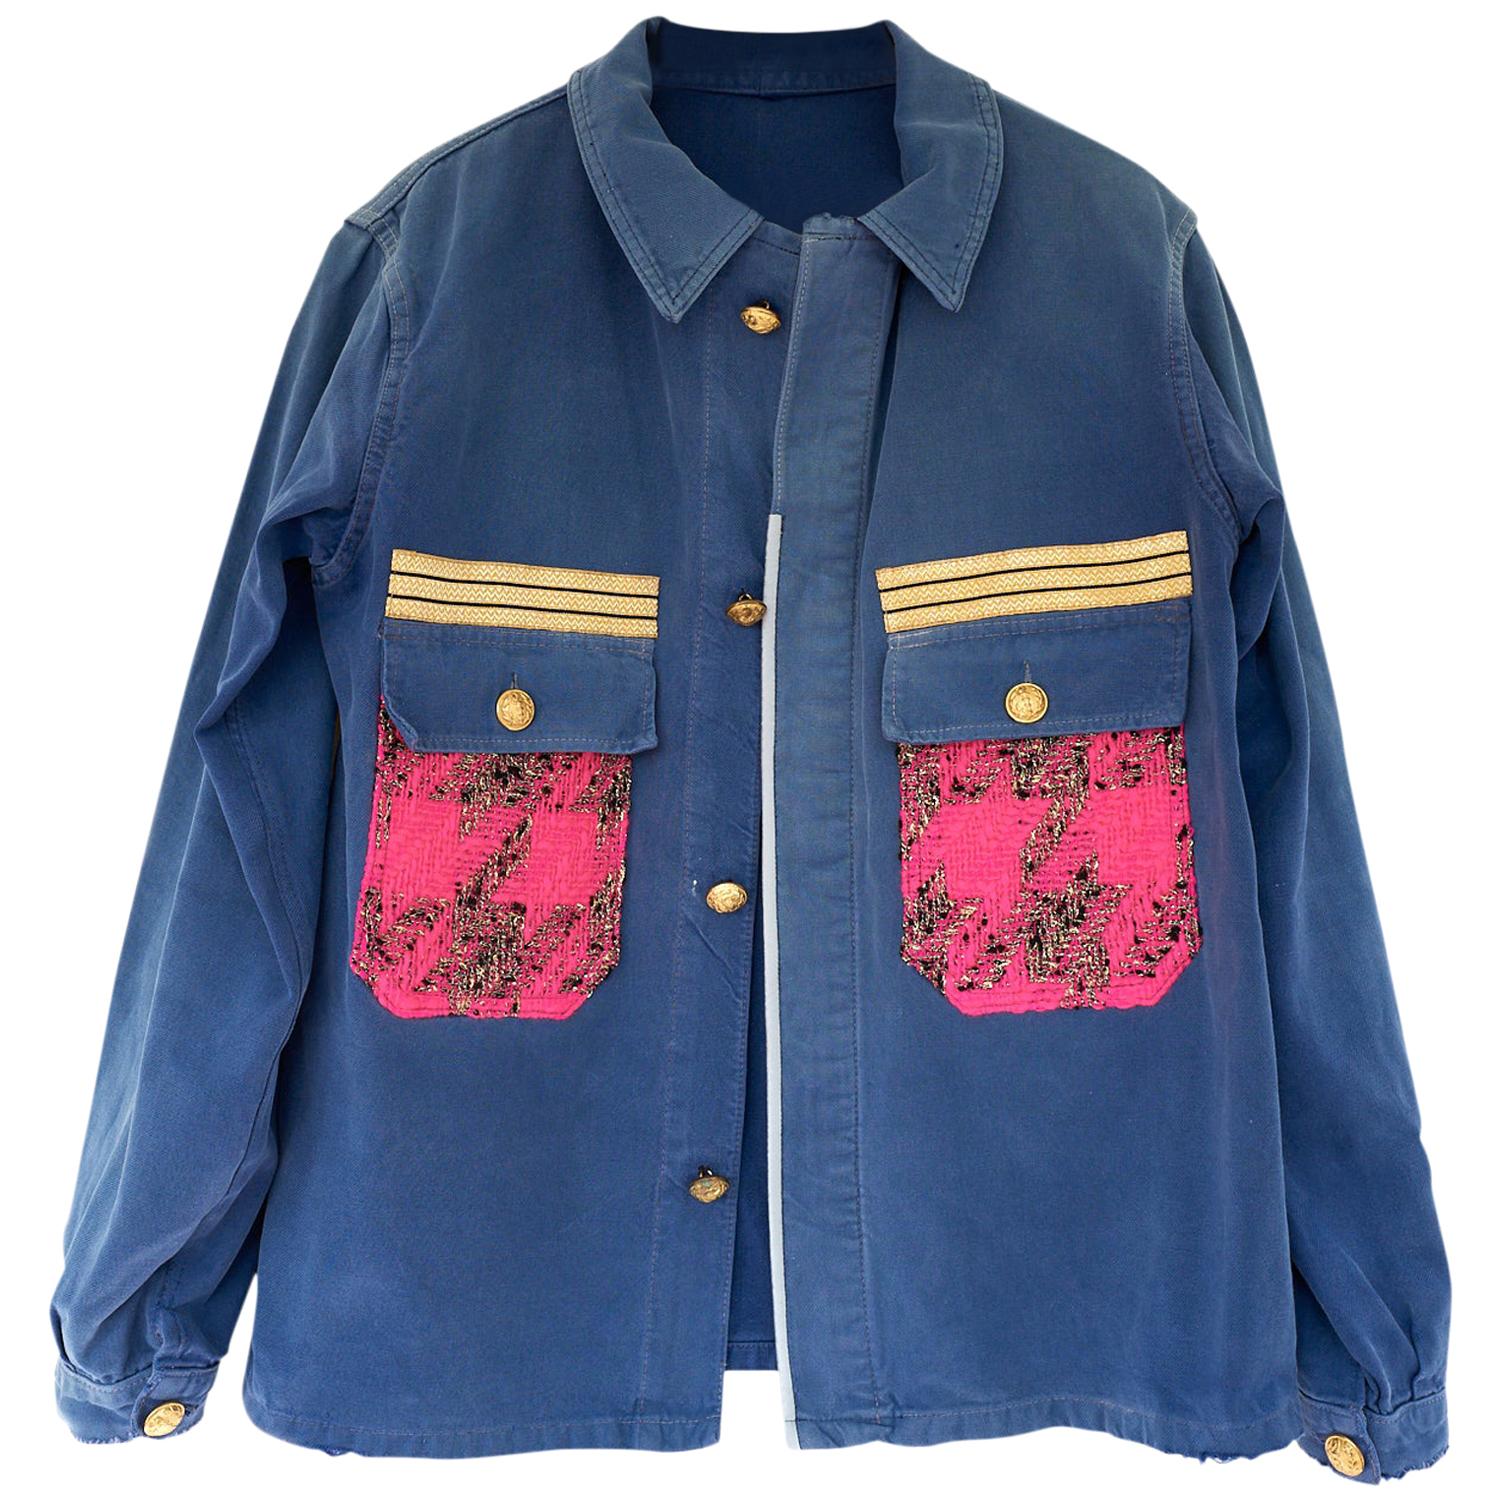 French Work Jacket Blue Upcycled Gold Bottons Neon Pink Tweed J Dauphin